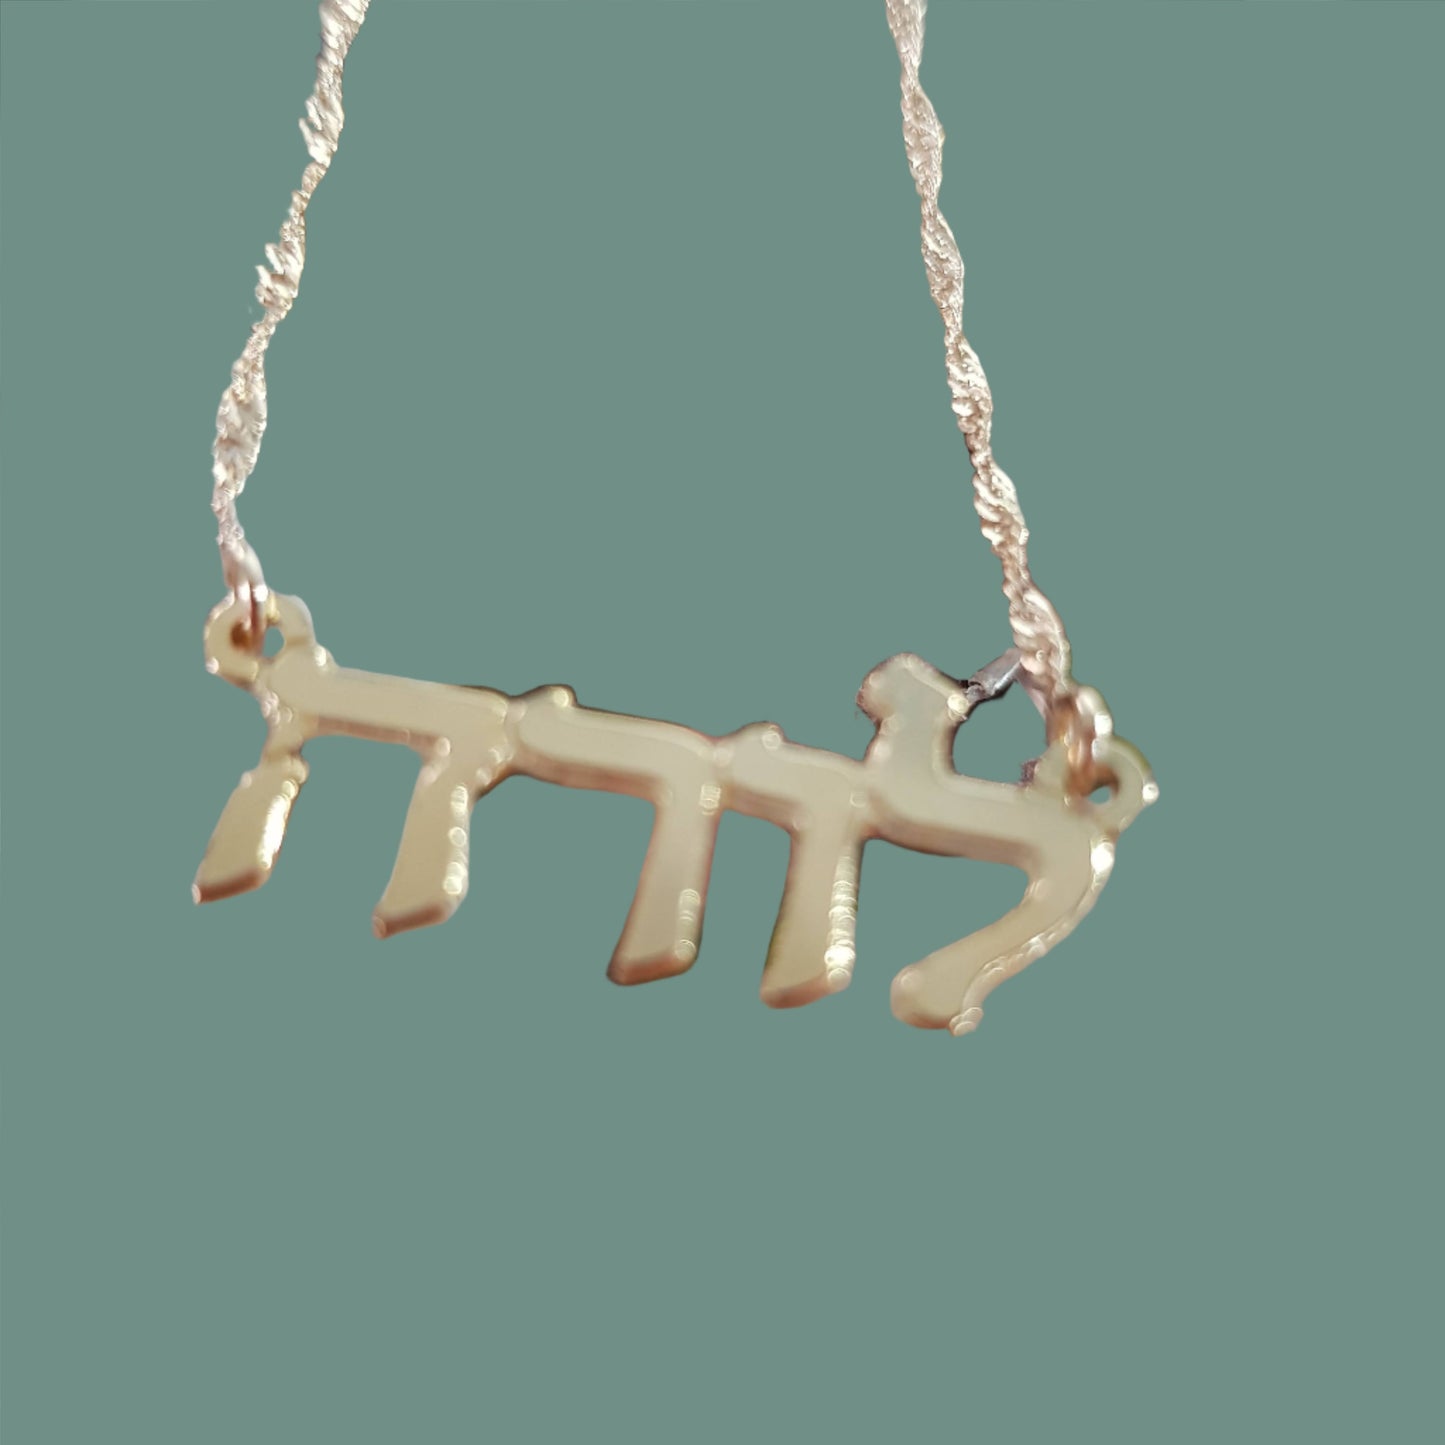 Bluenoemi Jewelry Necklaces & Pendants Hebrew Name Necklace. 925 Sterling Silver / Goldfilled